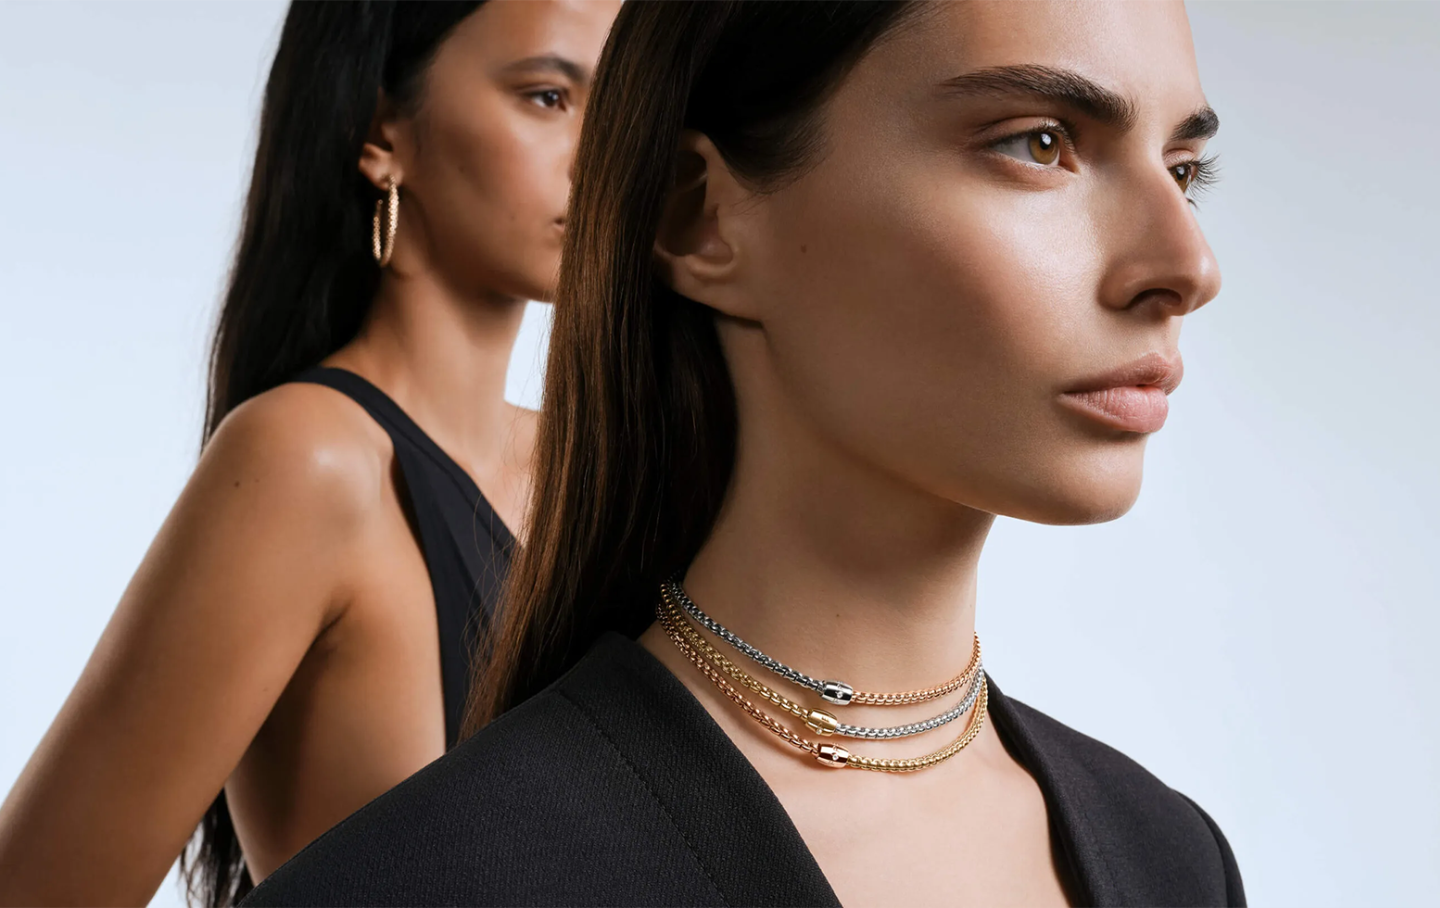 FOPE: Anywhere, Anytime
The narrative of Everyday Luxury continues, with FOPE jewellery once again standing out for the extreme comfort of wearing and contemporary design in their latest collection. 